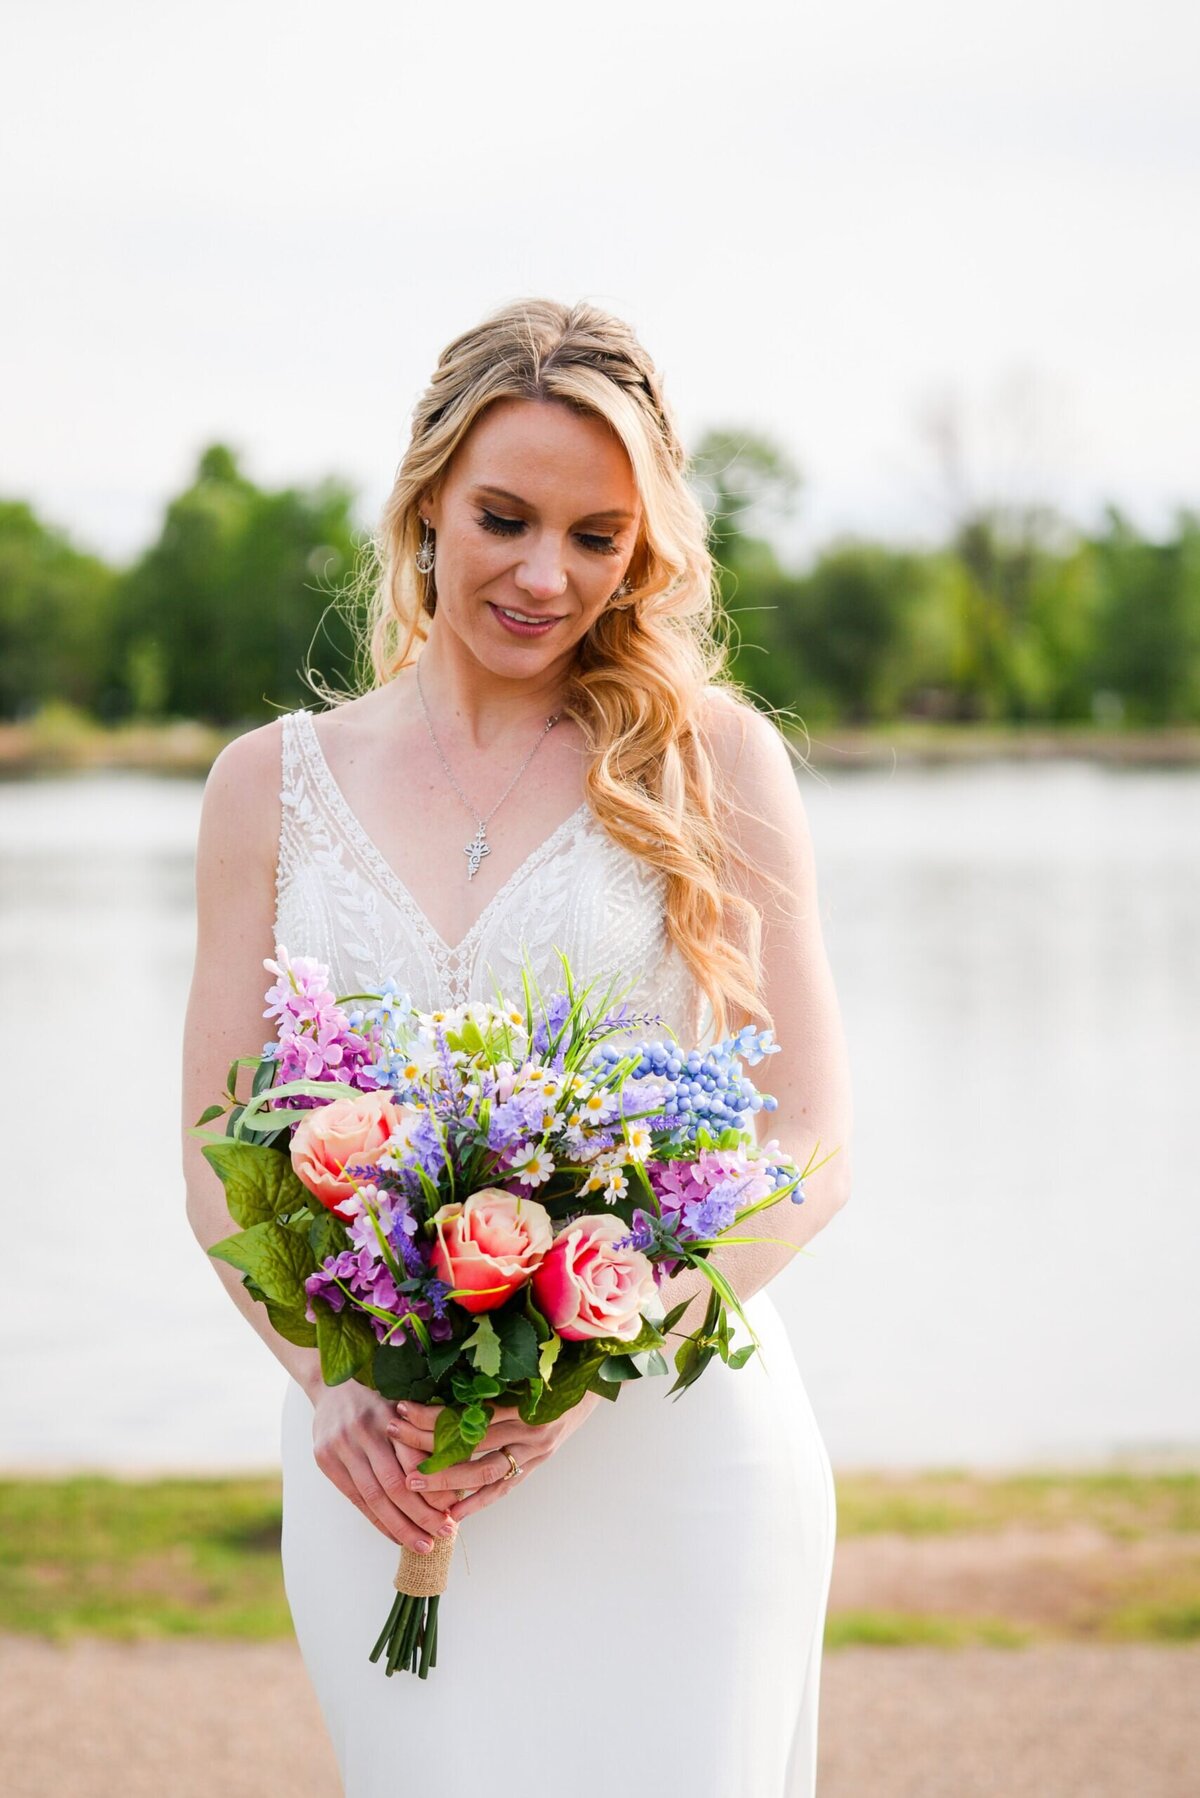 A bride looks down at her vibrant colored bouquet.